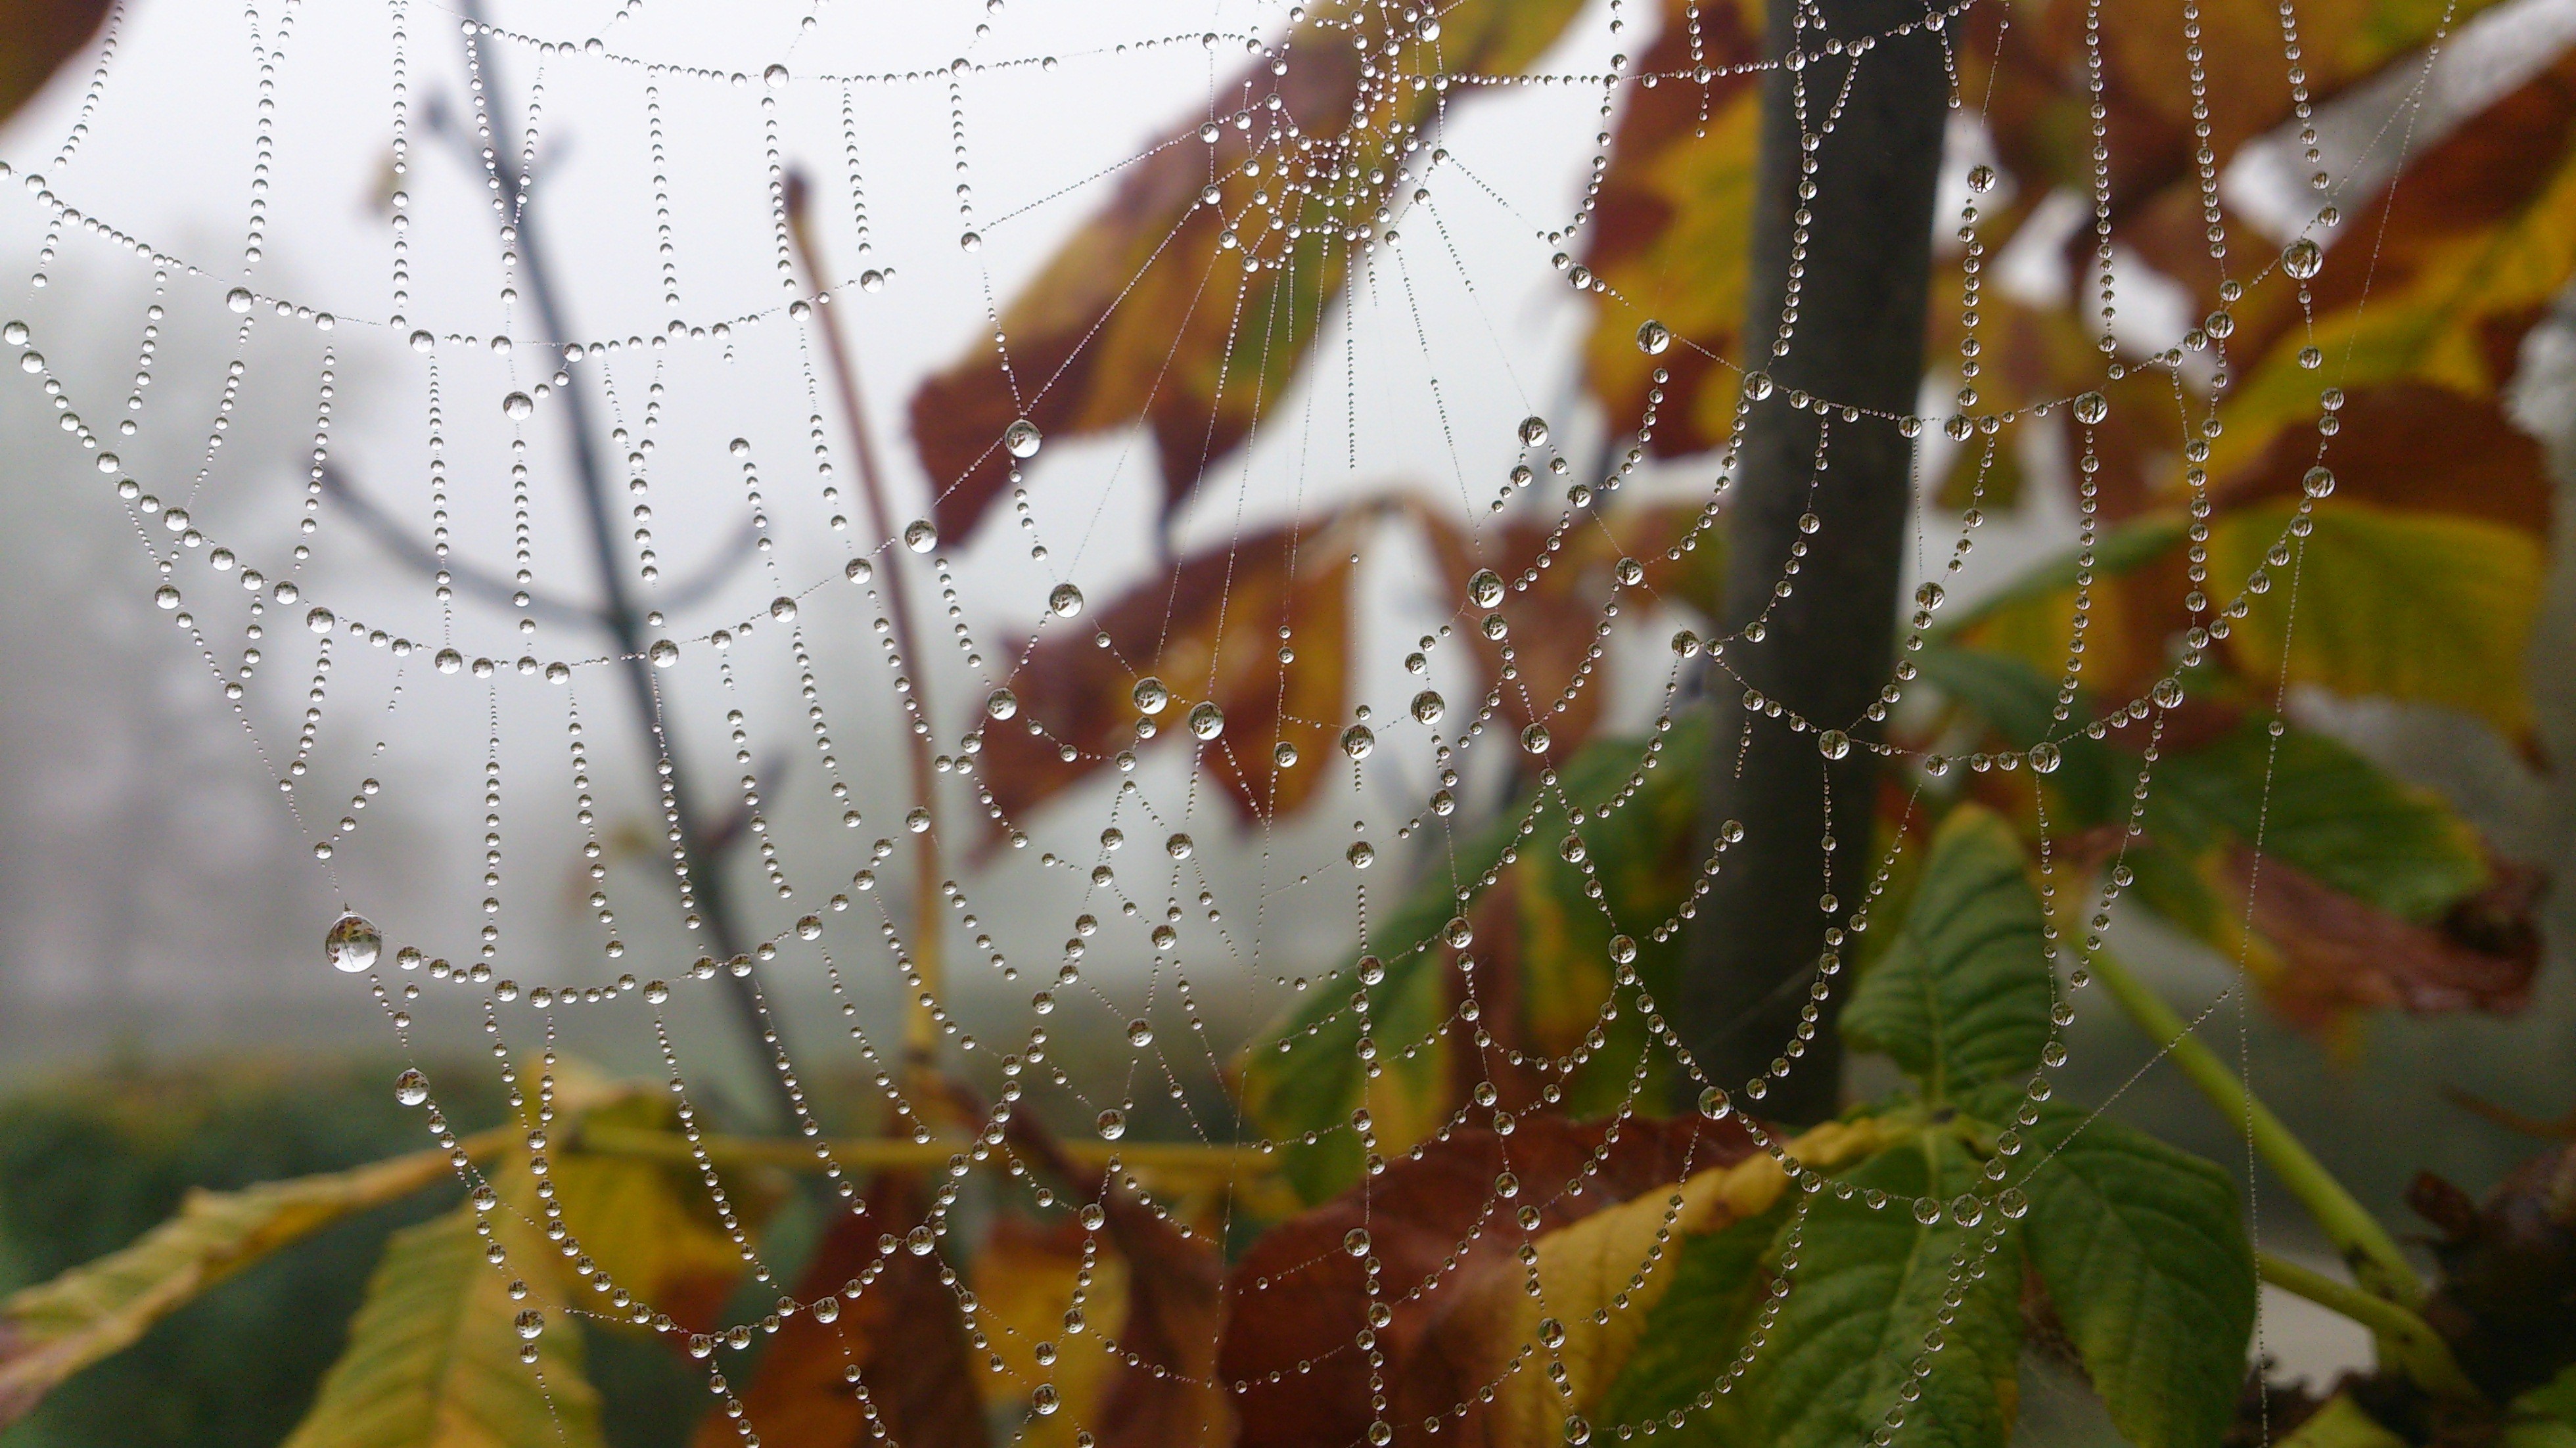 General 3920x2204 nature spiderwebs water drops morning leaves depth of field fall plants closeup macro